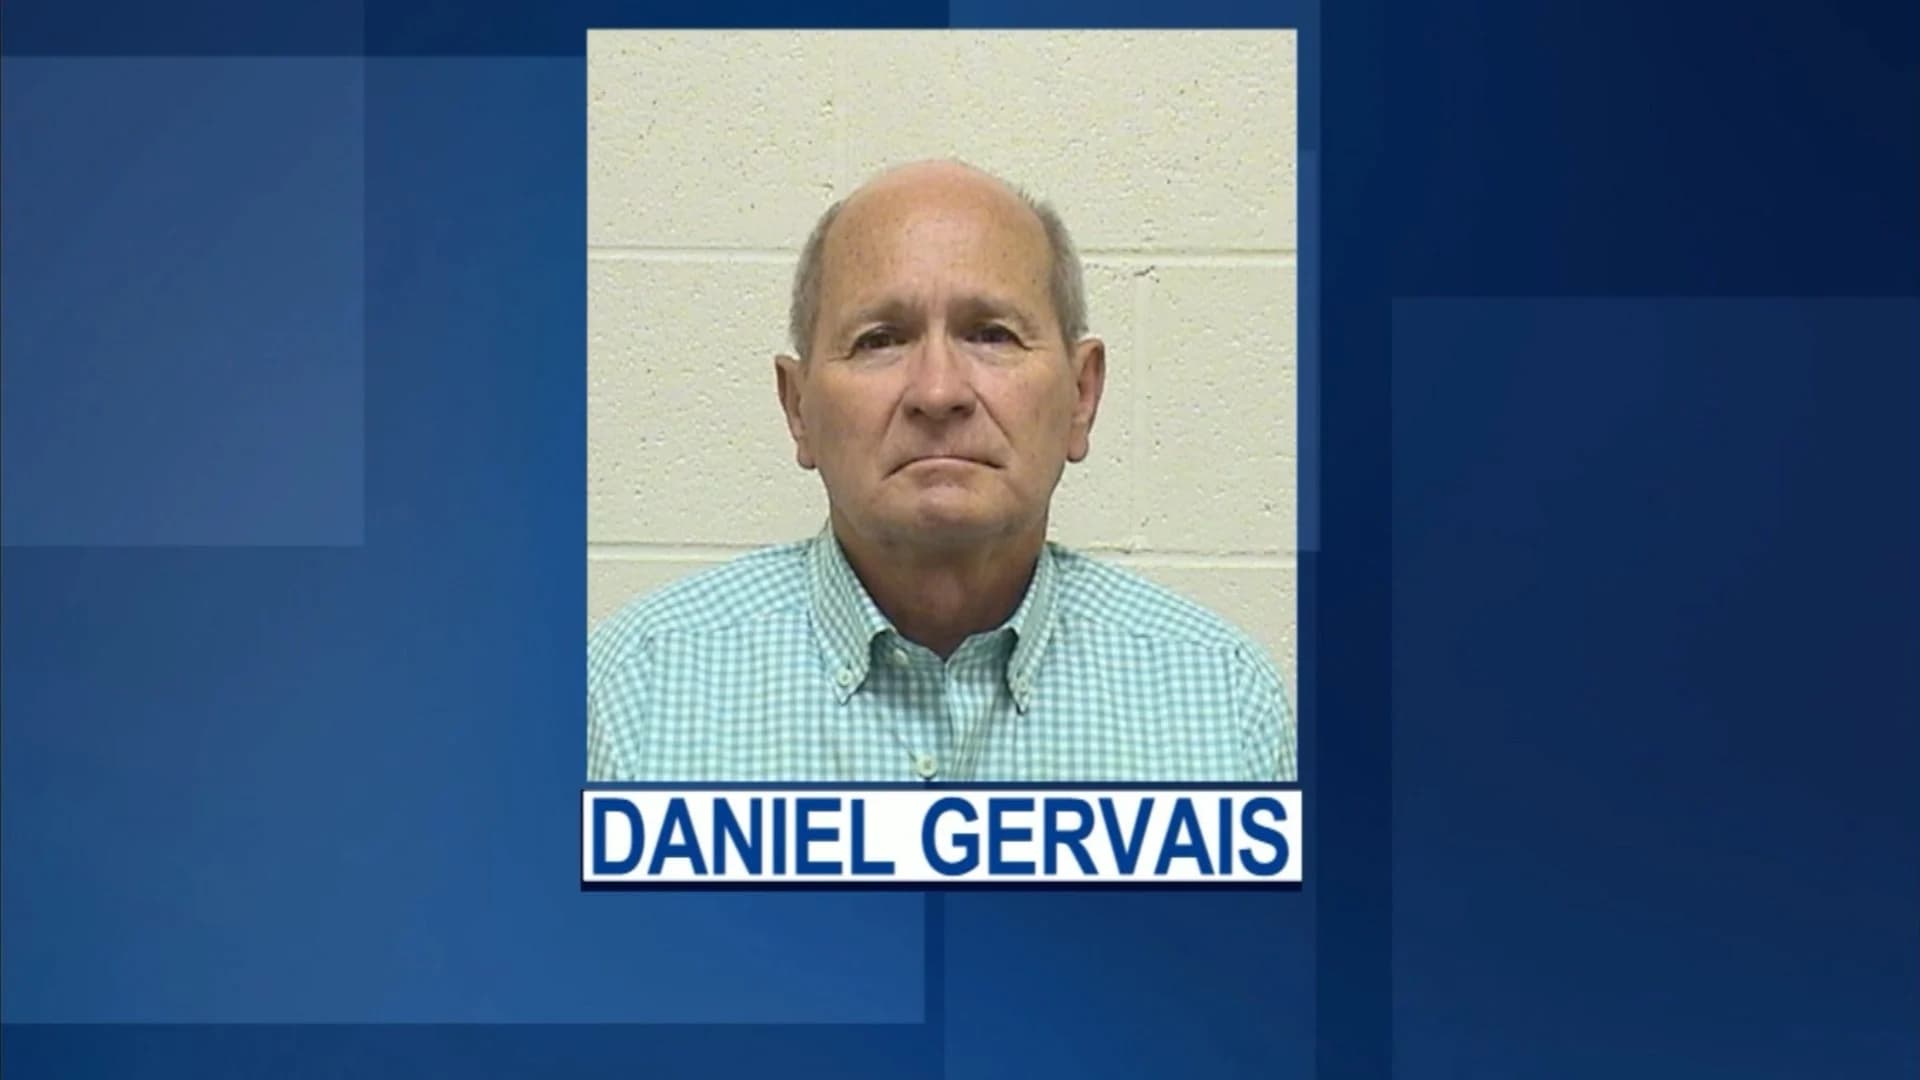 70-year-old Torrington man charged with killing wife, trying to hide evidence